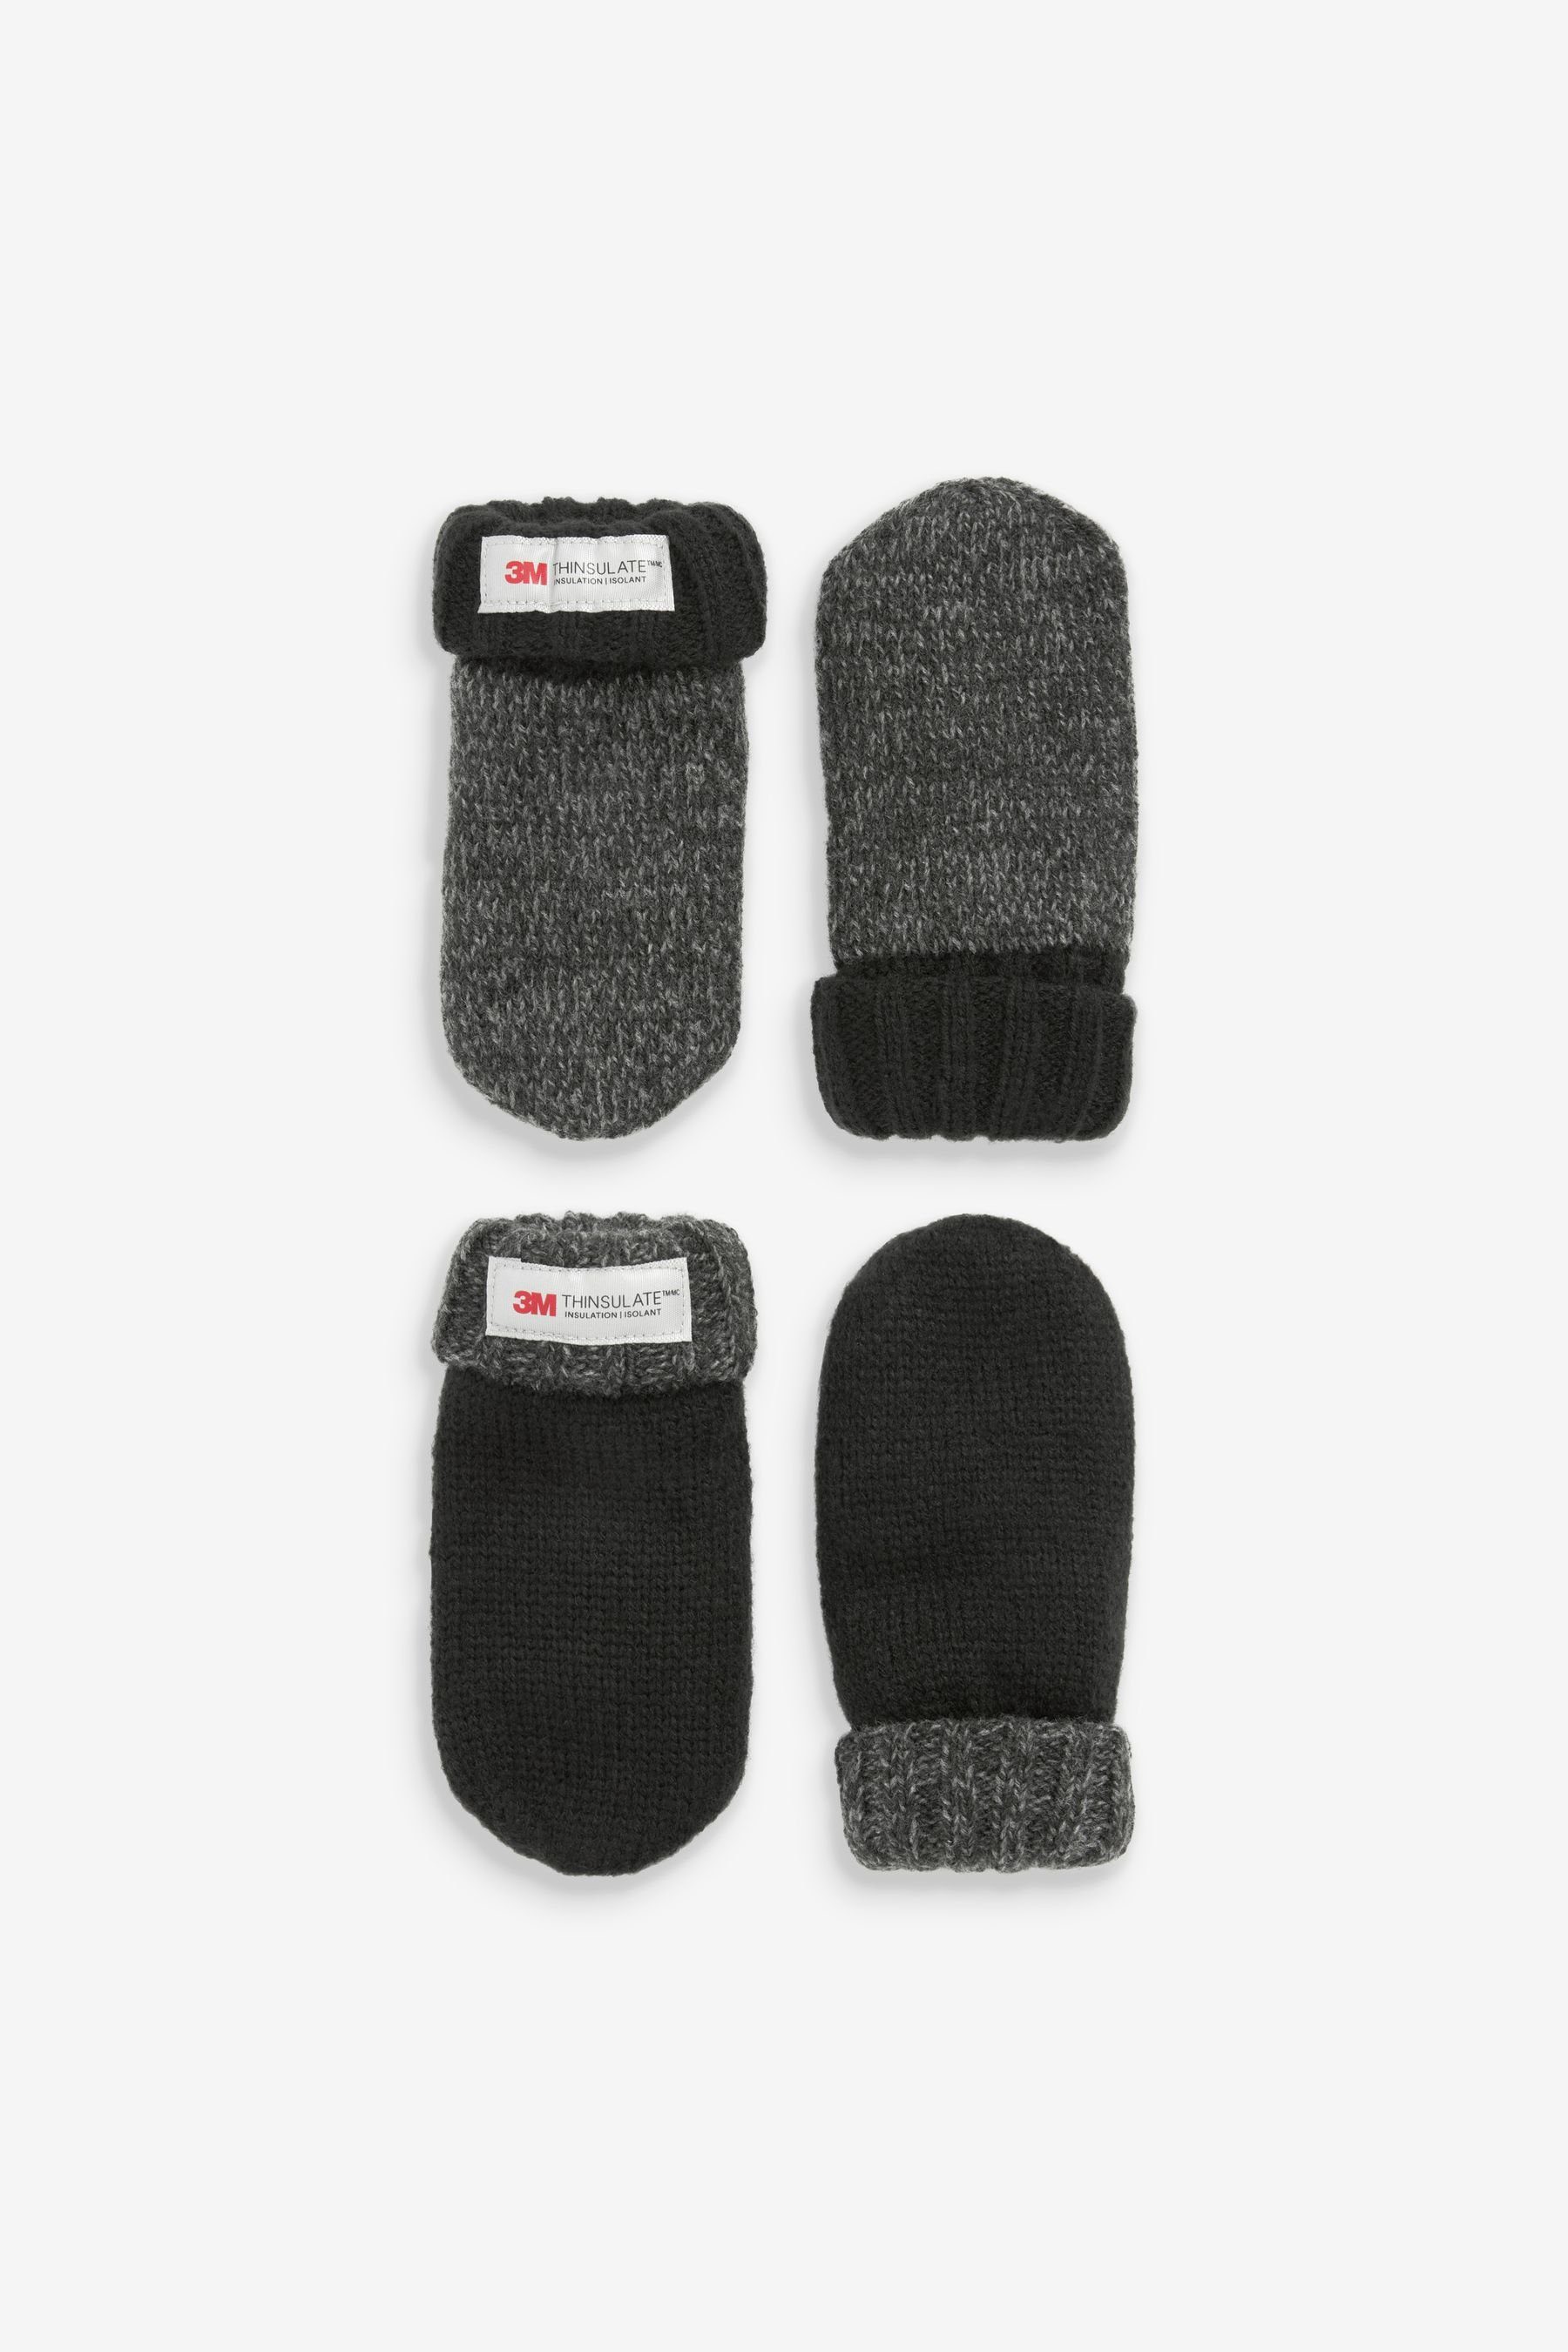 Fausthandschuhe, Fäustlinge Thinsulate™ Charcoal Grey 2er-Pack Next